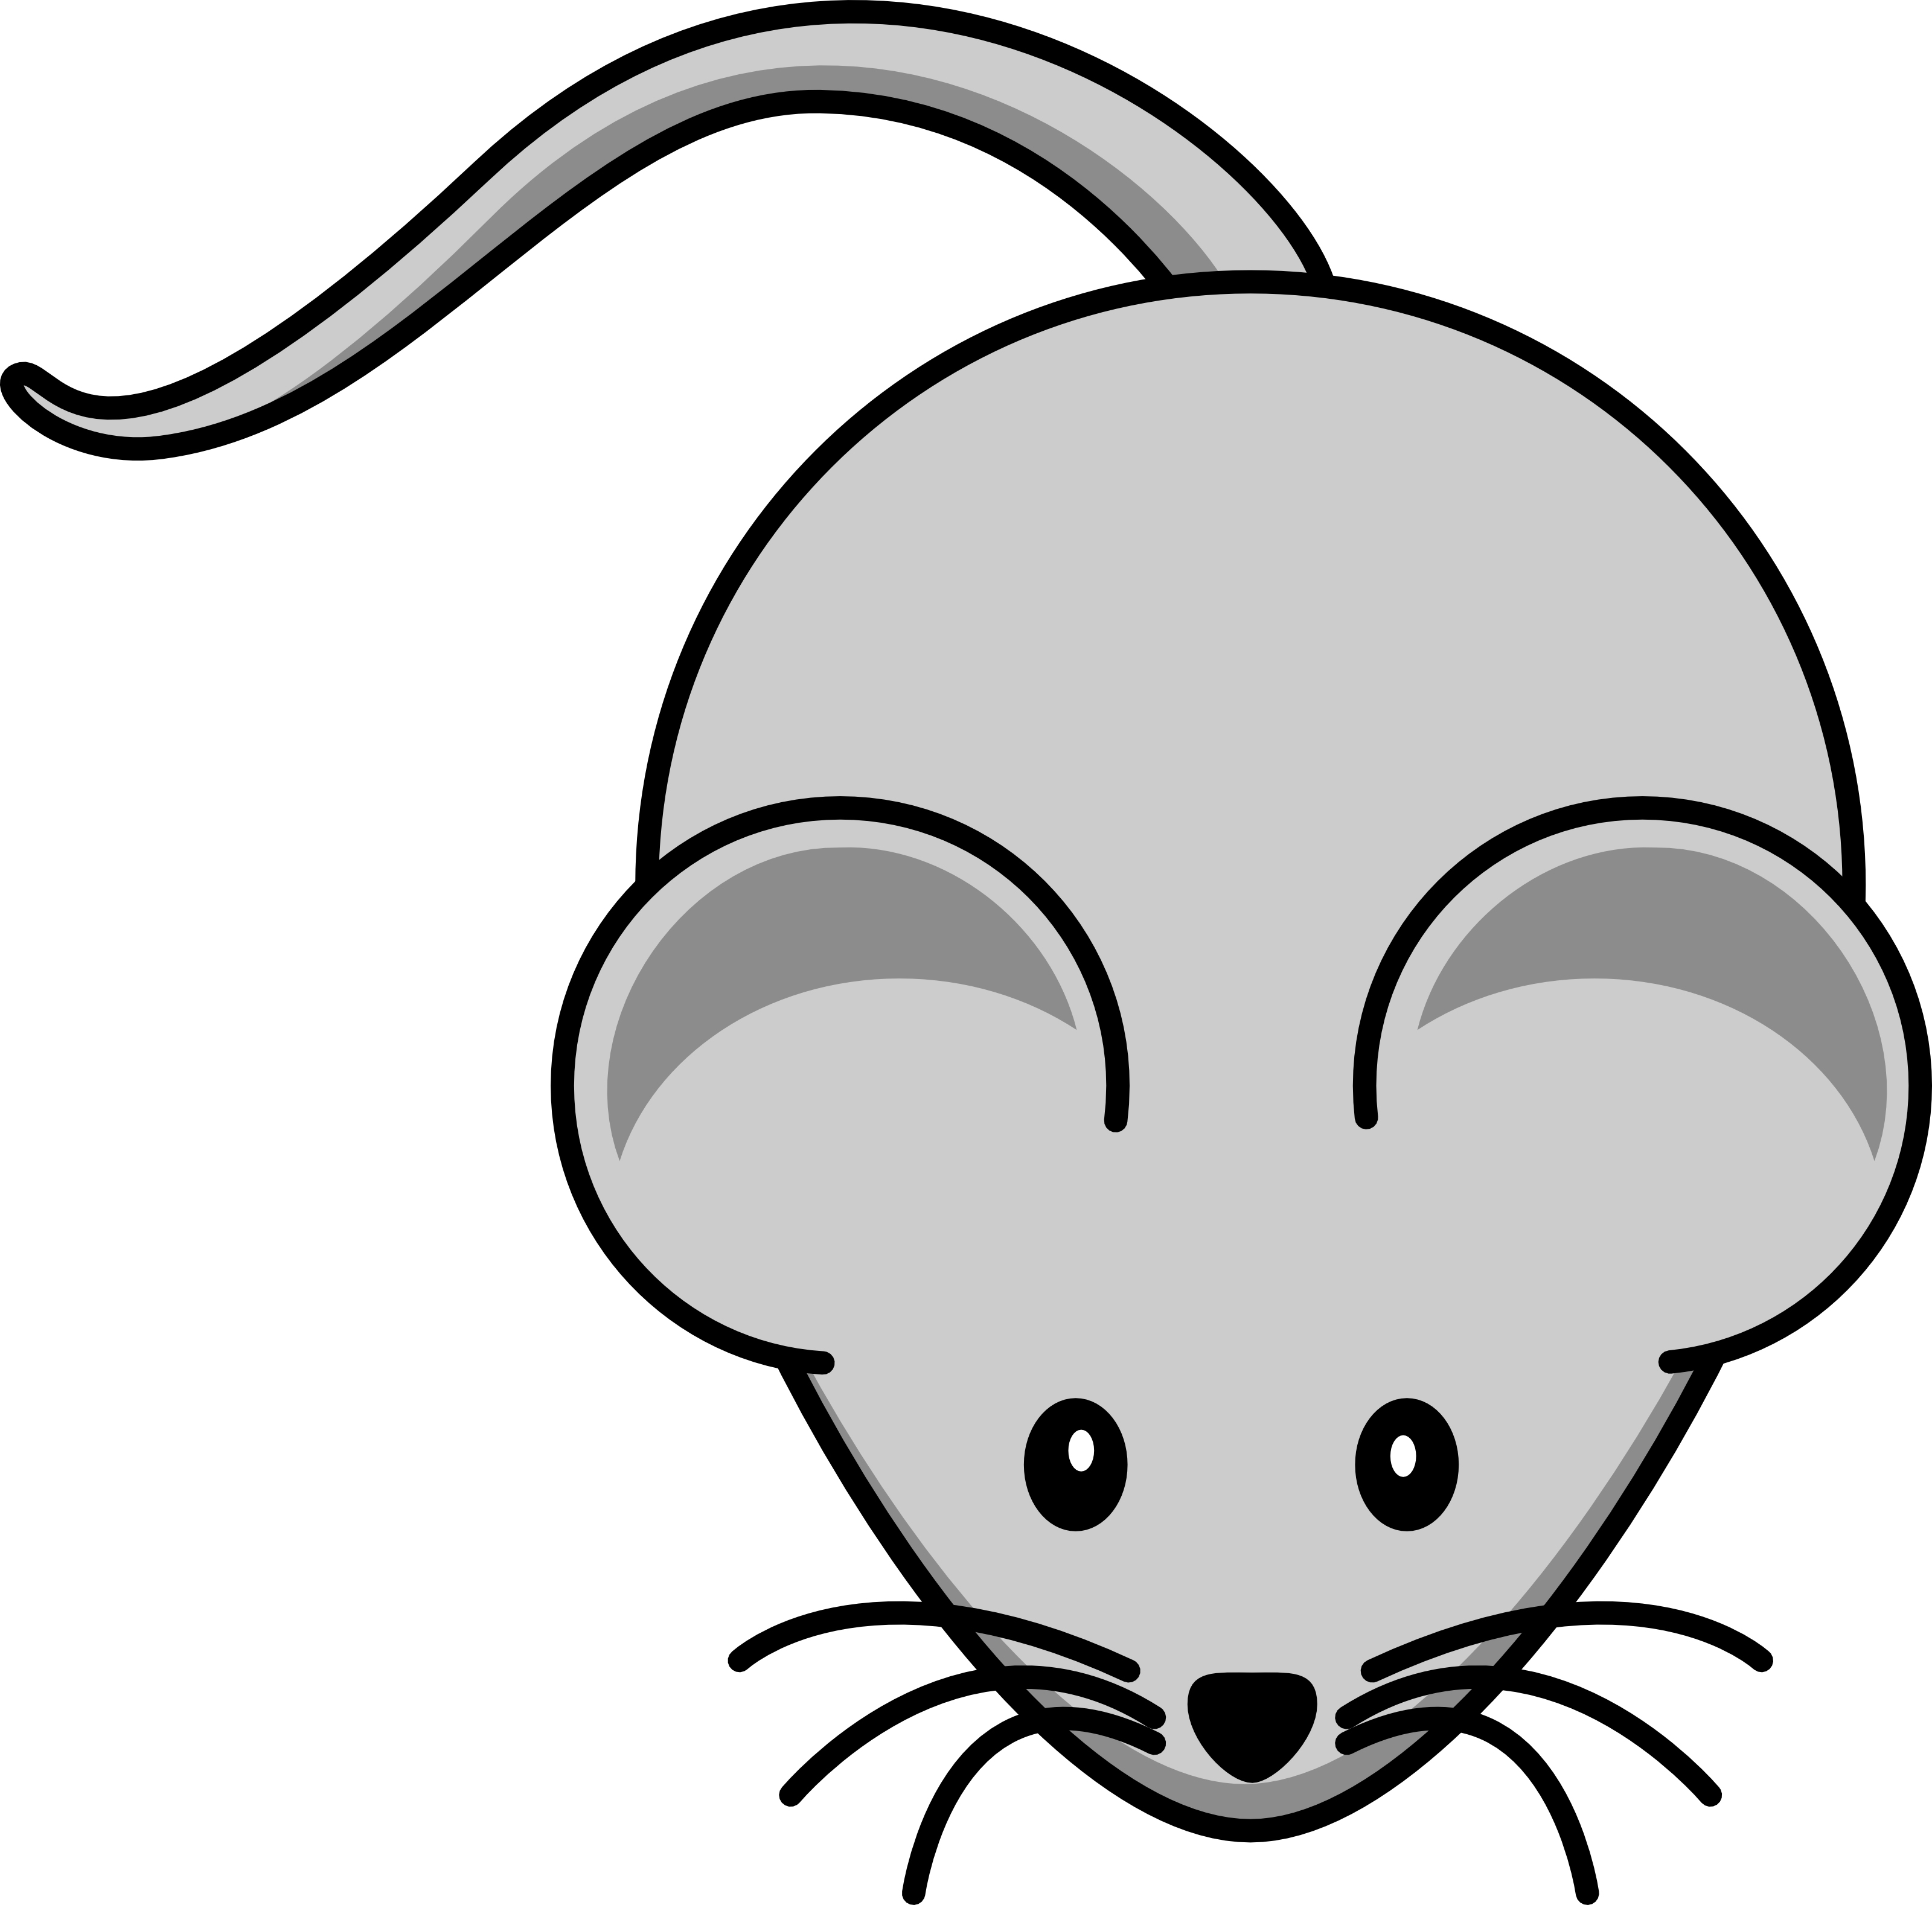 Free Cartoon Gray Field Mouse Clipart Illustration by 000157 .